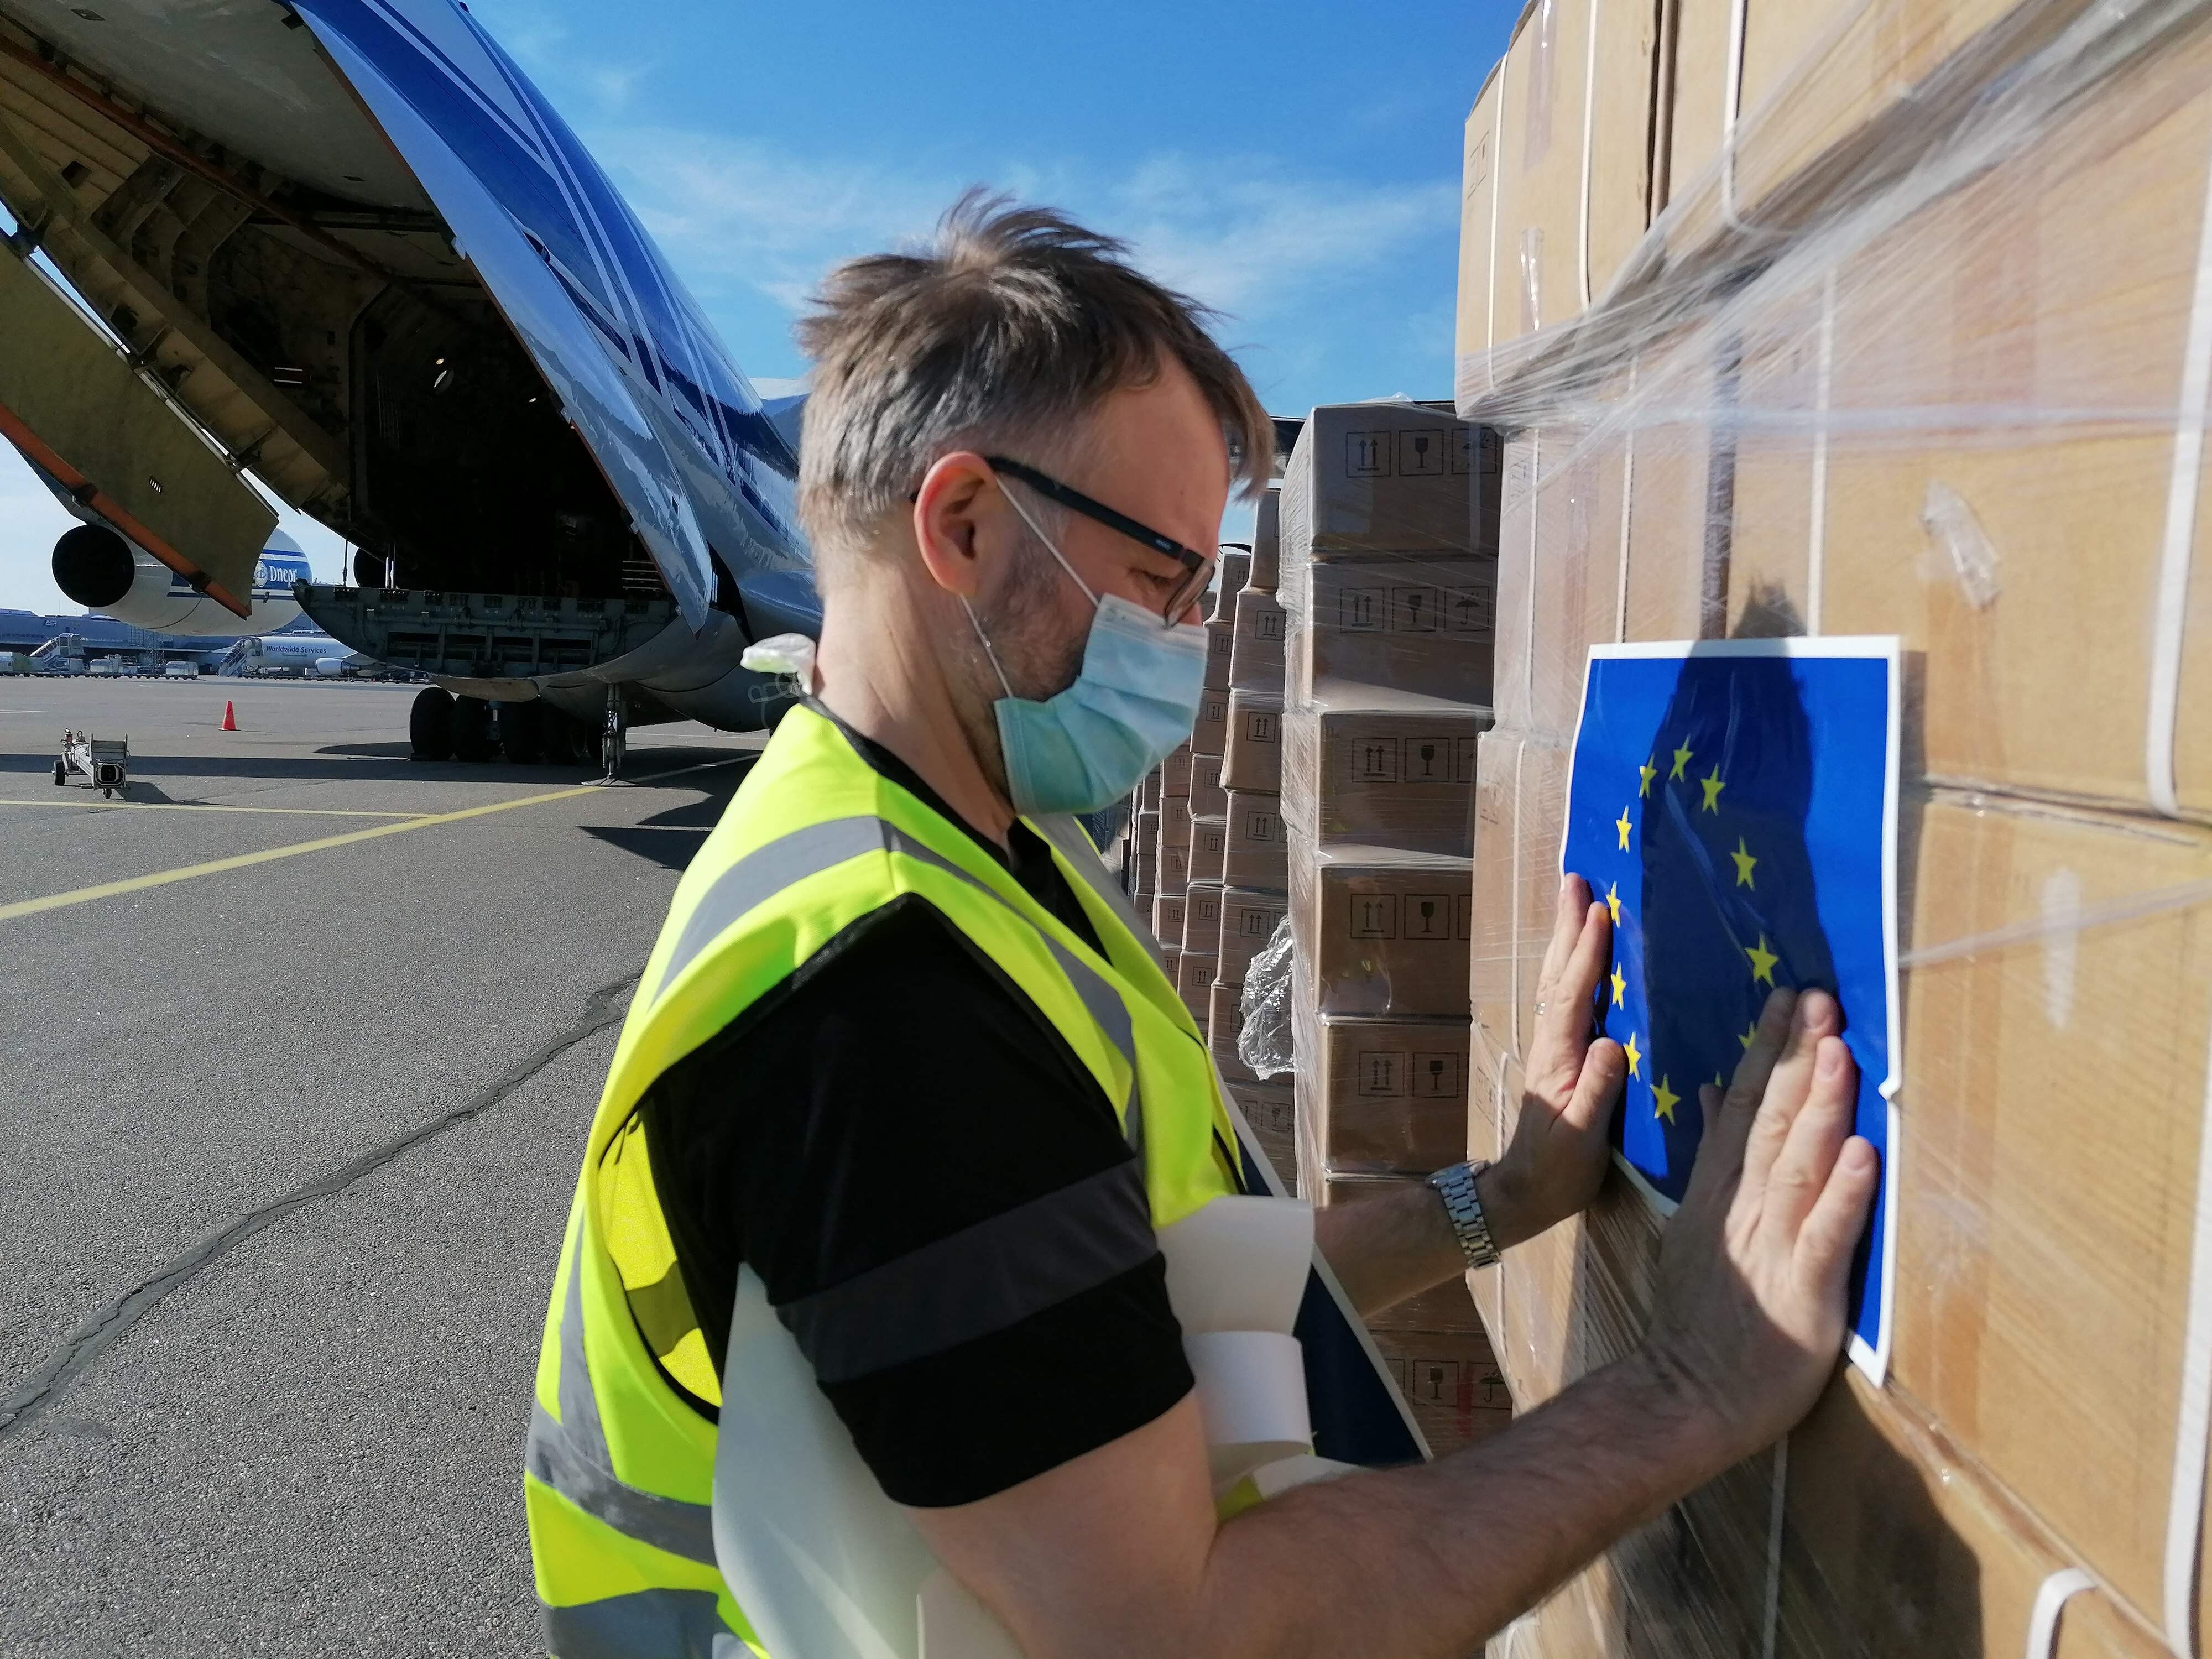 A Red Cross worker sticks an EU flag sticker on a shipment of ventilators from Germany before it is loaded onto a cargo plane bound for New Delhi, India, at Helsinki airport in Finland on May 11. A total of 18 EU member states have pledged medical aid to India. Photo: AFP